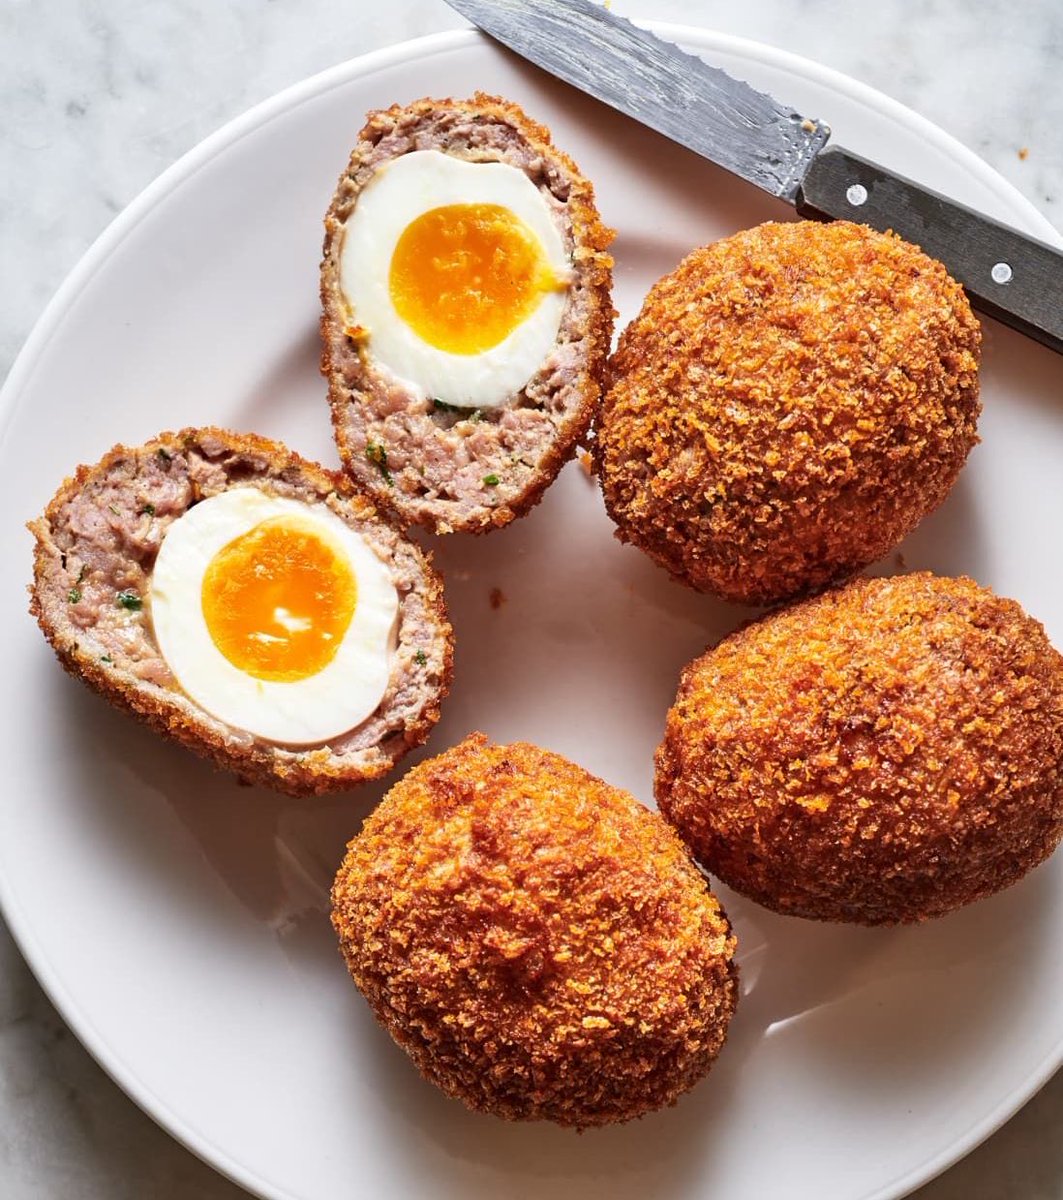 Scotch Eggs… Yes or No? 🤔